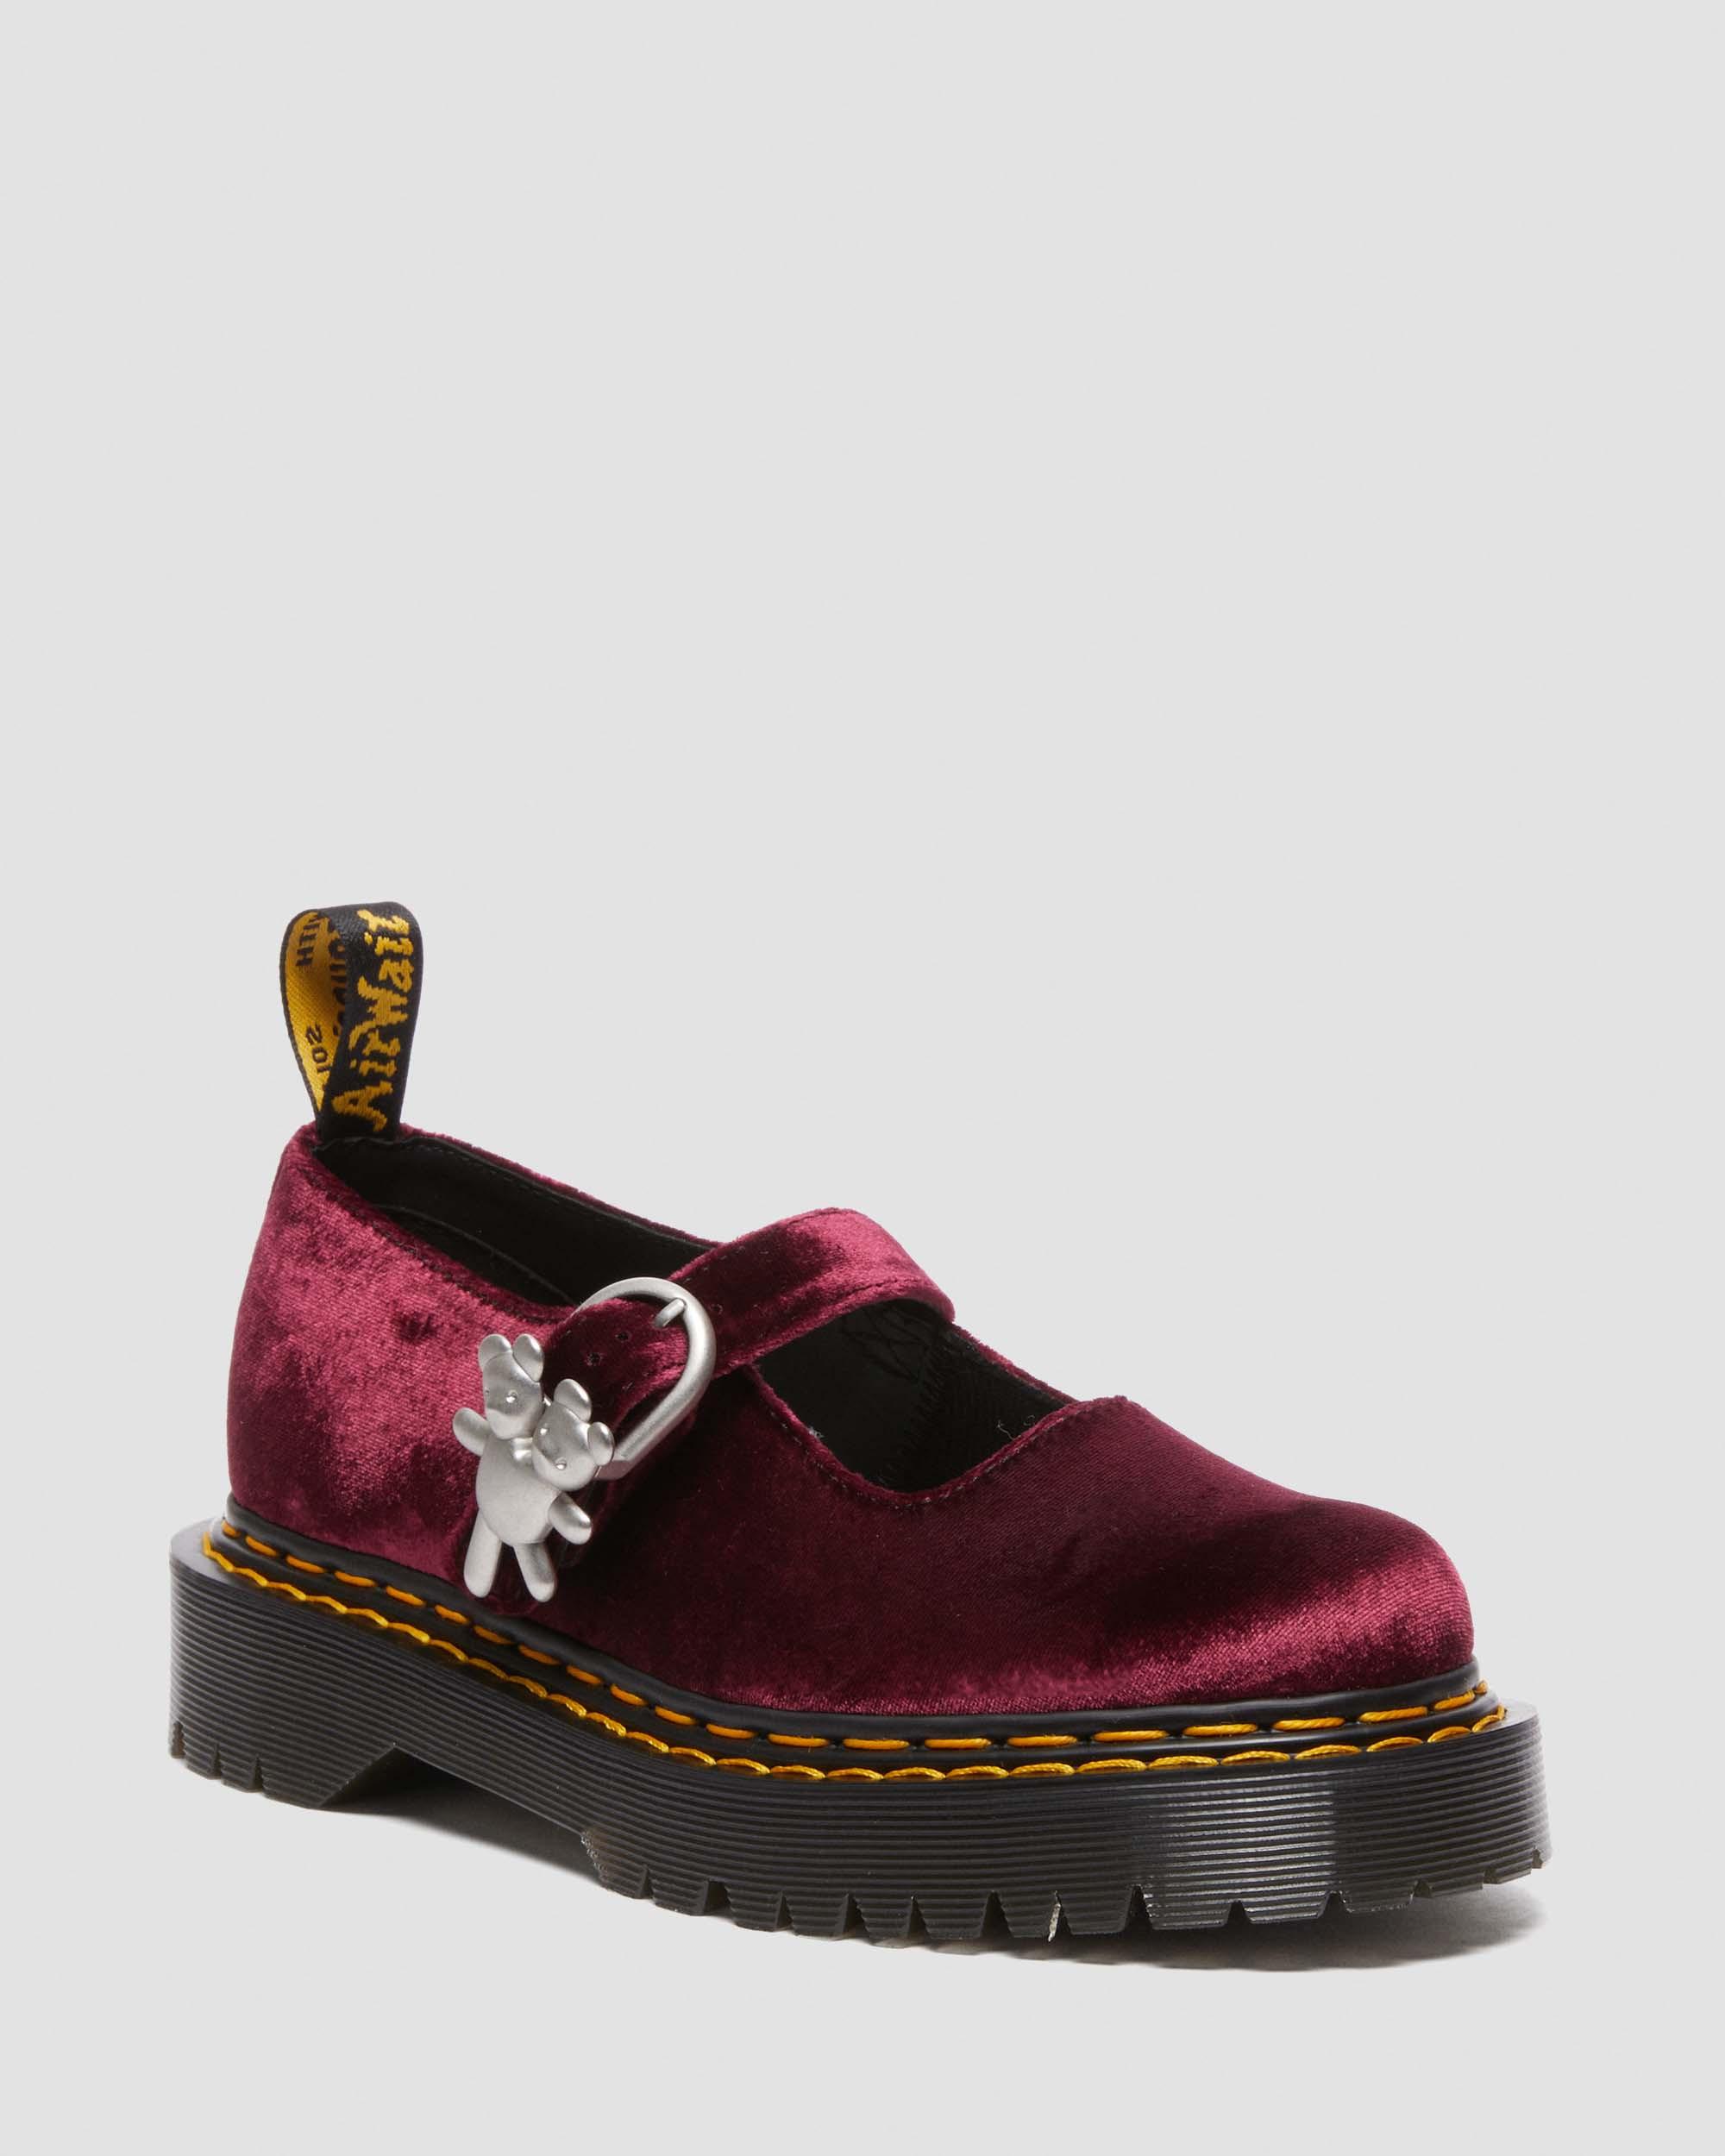 Addina Heaven by Marc Jacobs Velvet Shoes, Cherry Red | Dr. Martens